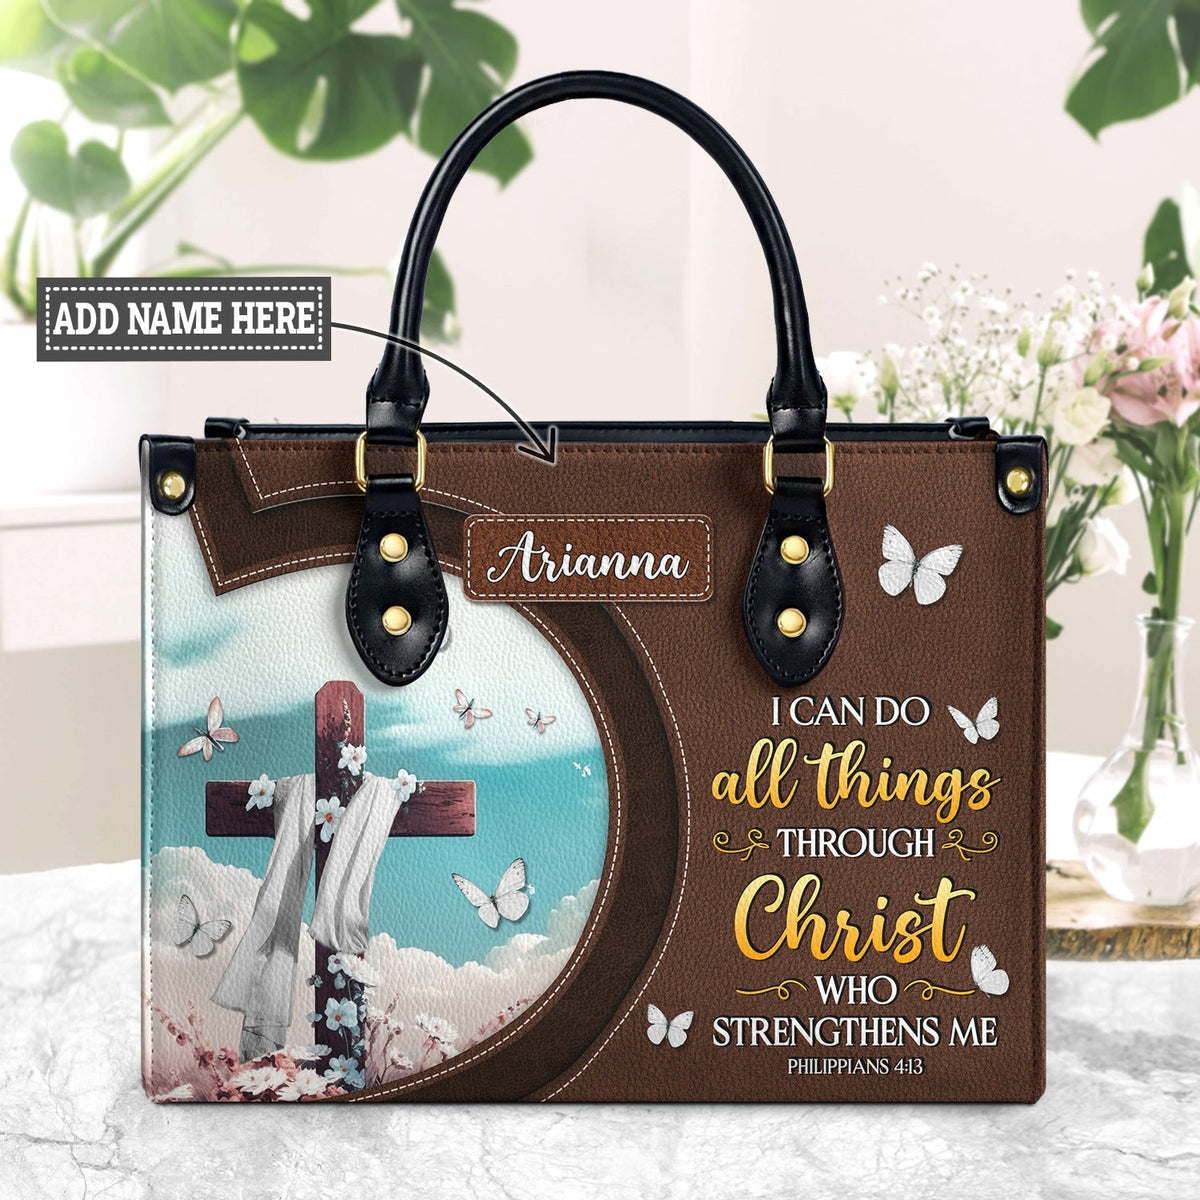 God Says I Am Scripture Christian Leather Bag - Personalized